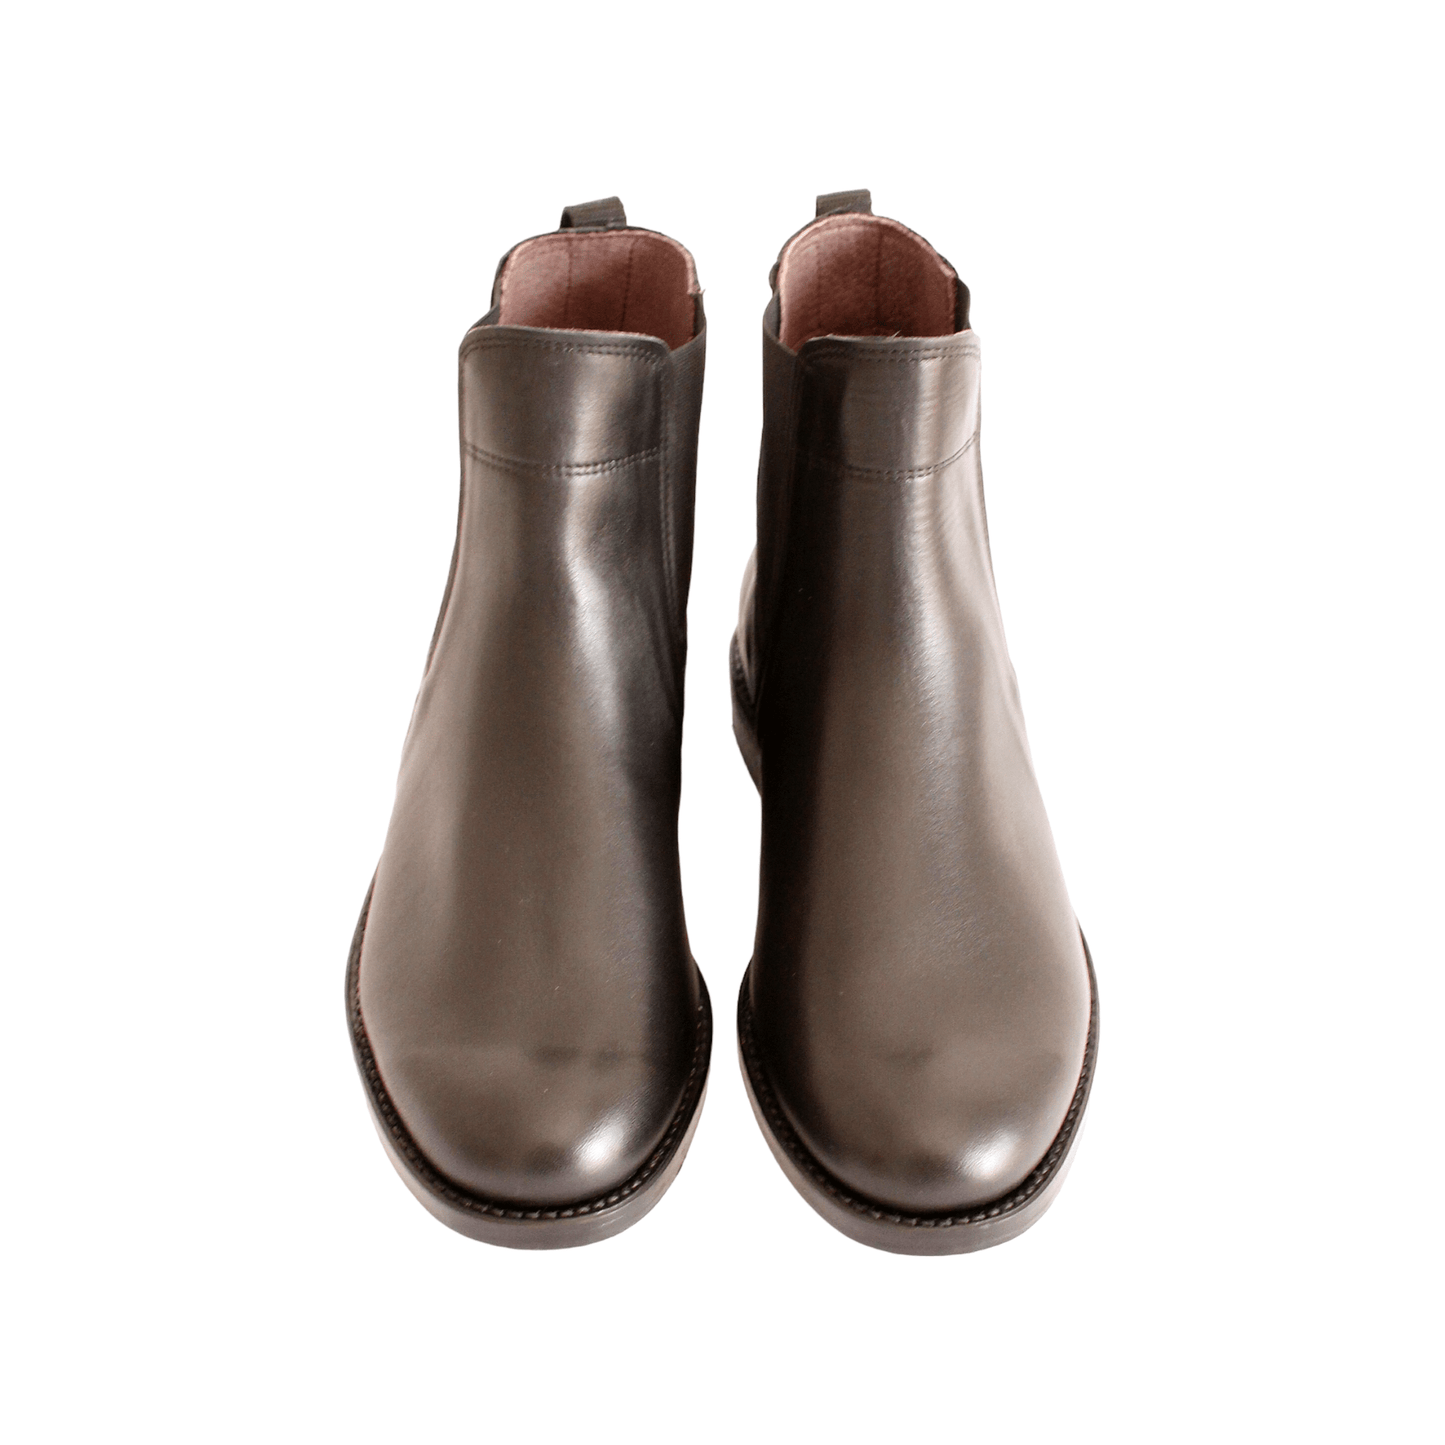 Lima Chelsea Boots - OldMulla - Boots Store, Handmade By George Family